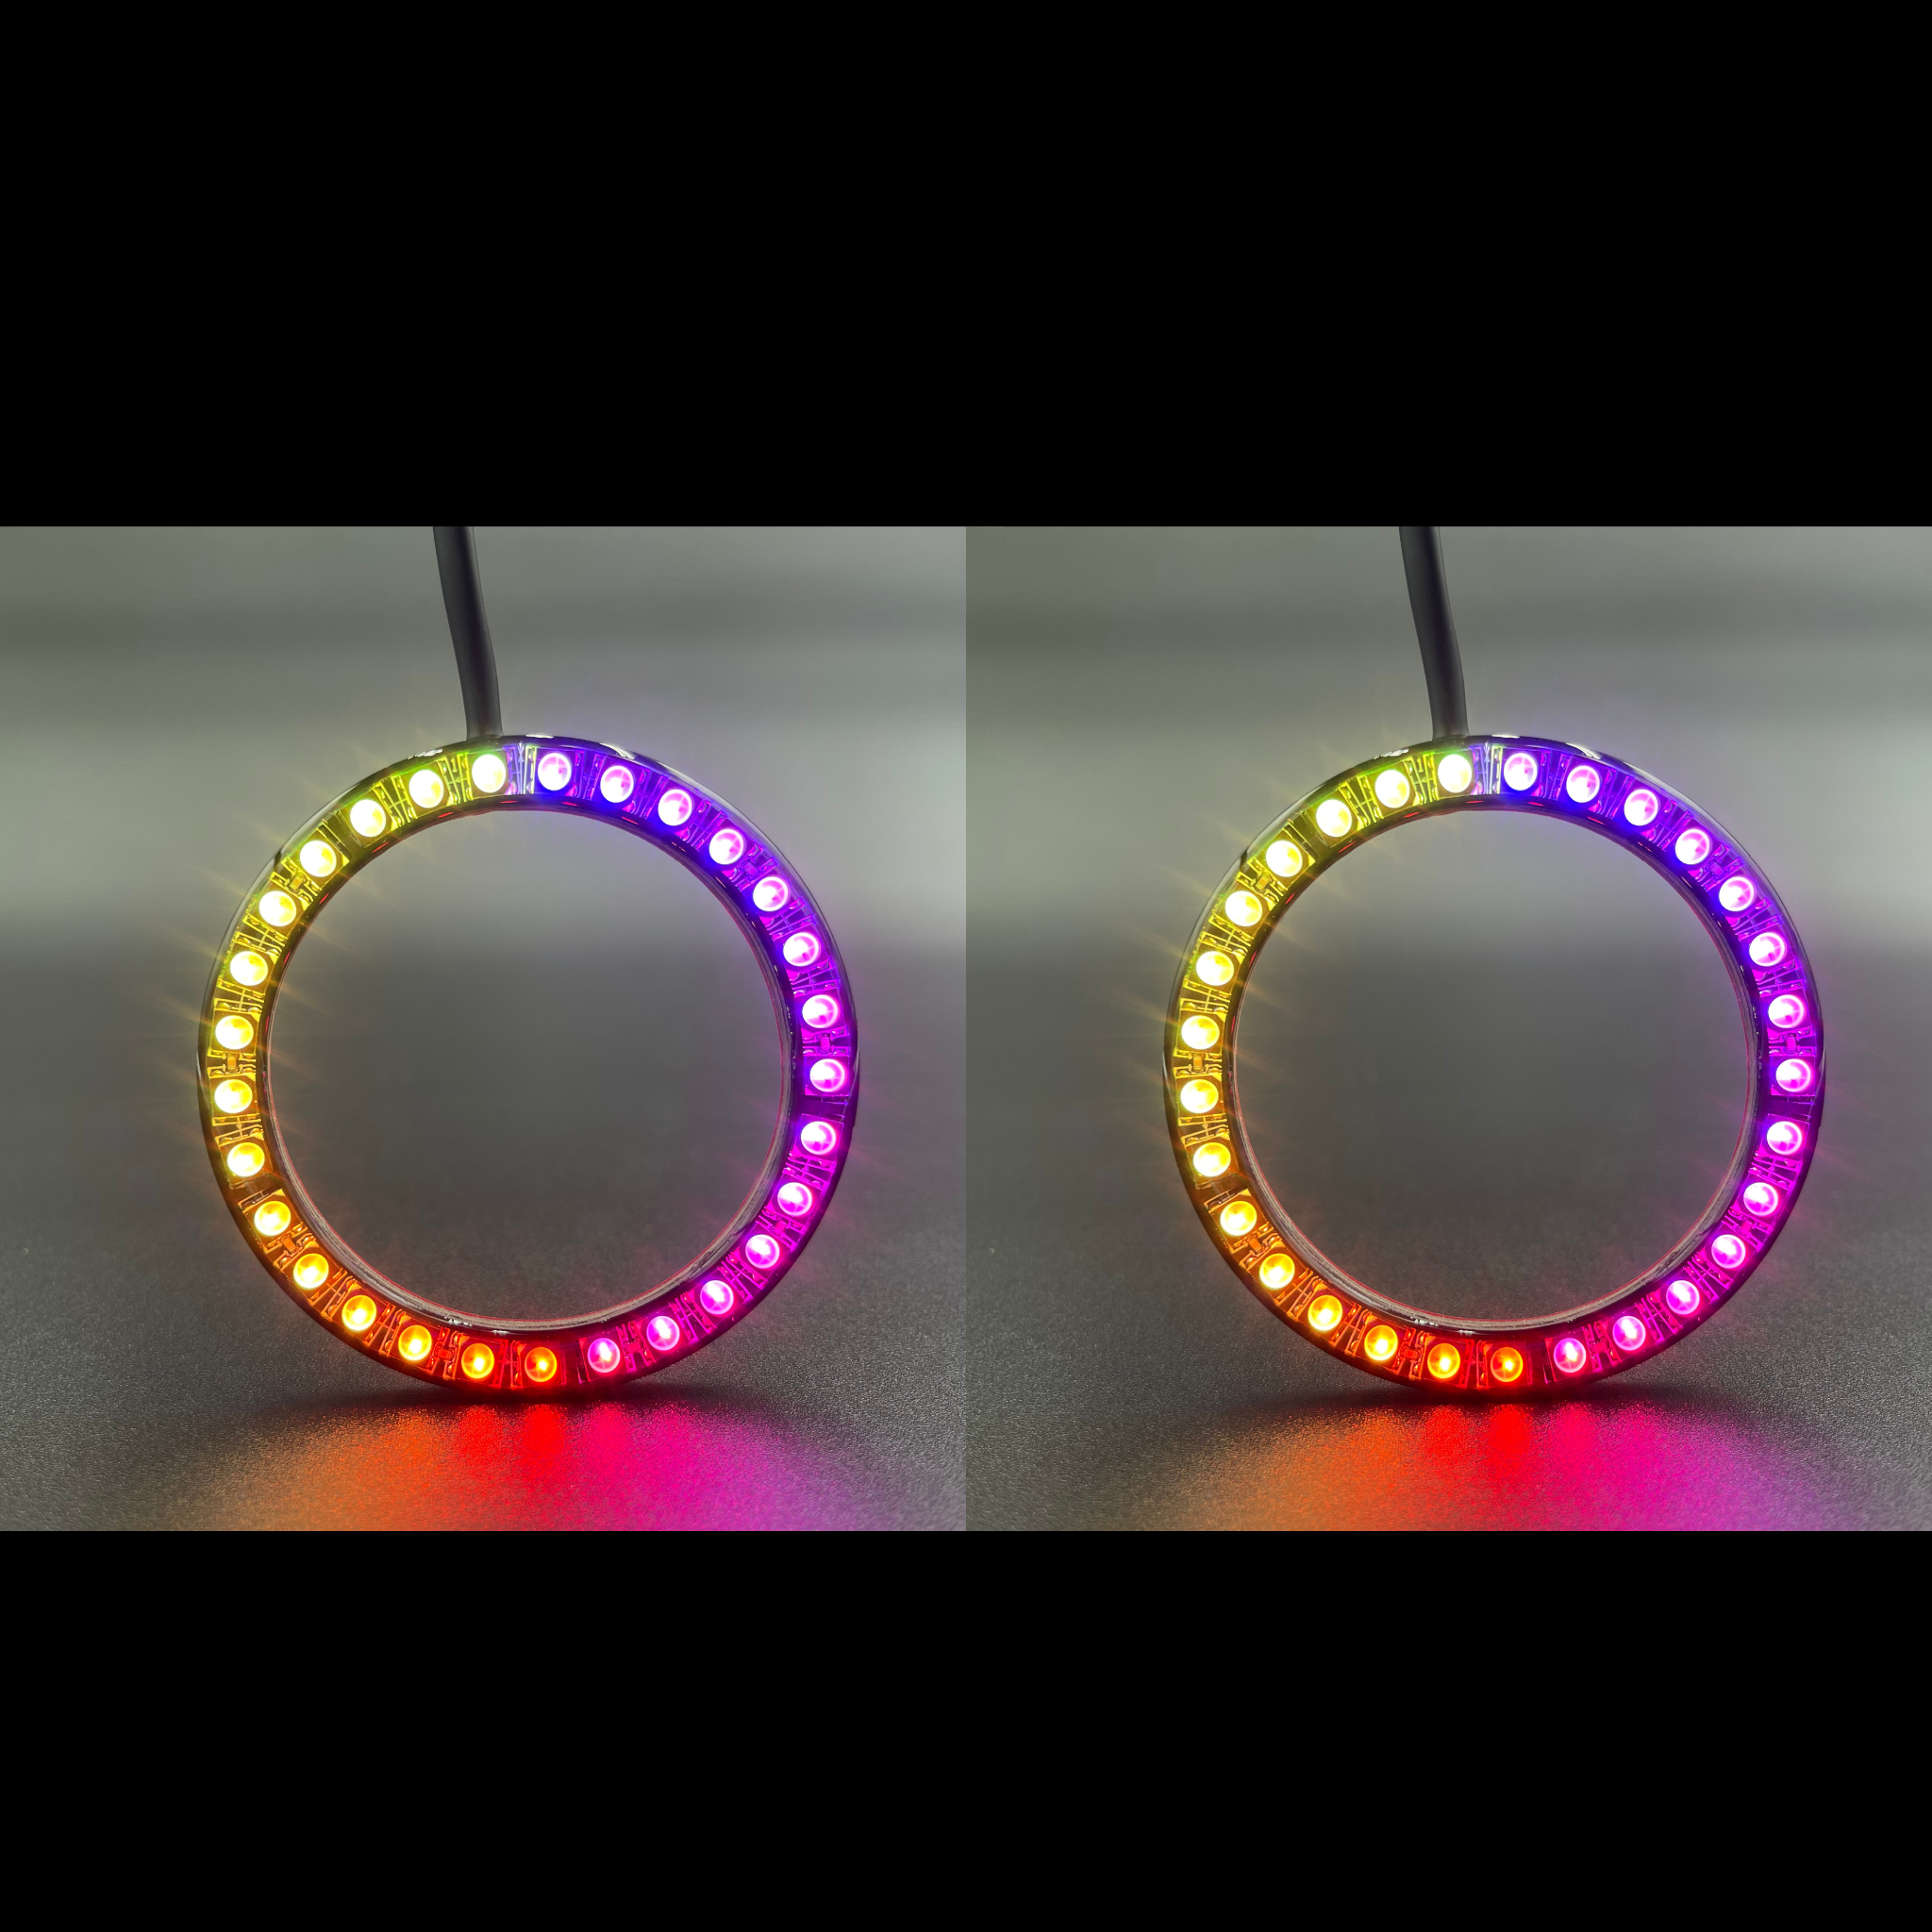 1994-2004 Ford F-250 Multicolor Halo Kit - RGB Halo Kits Multicolor Flow Series Color Chasing RGBWA LED headlight kit Colorshift Oracle Lighting Trendz OneUpLighting Morimoto theretrofitsource AutoLEDTech Diode Dynamics